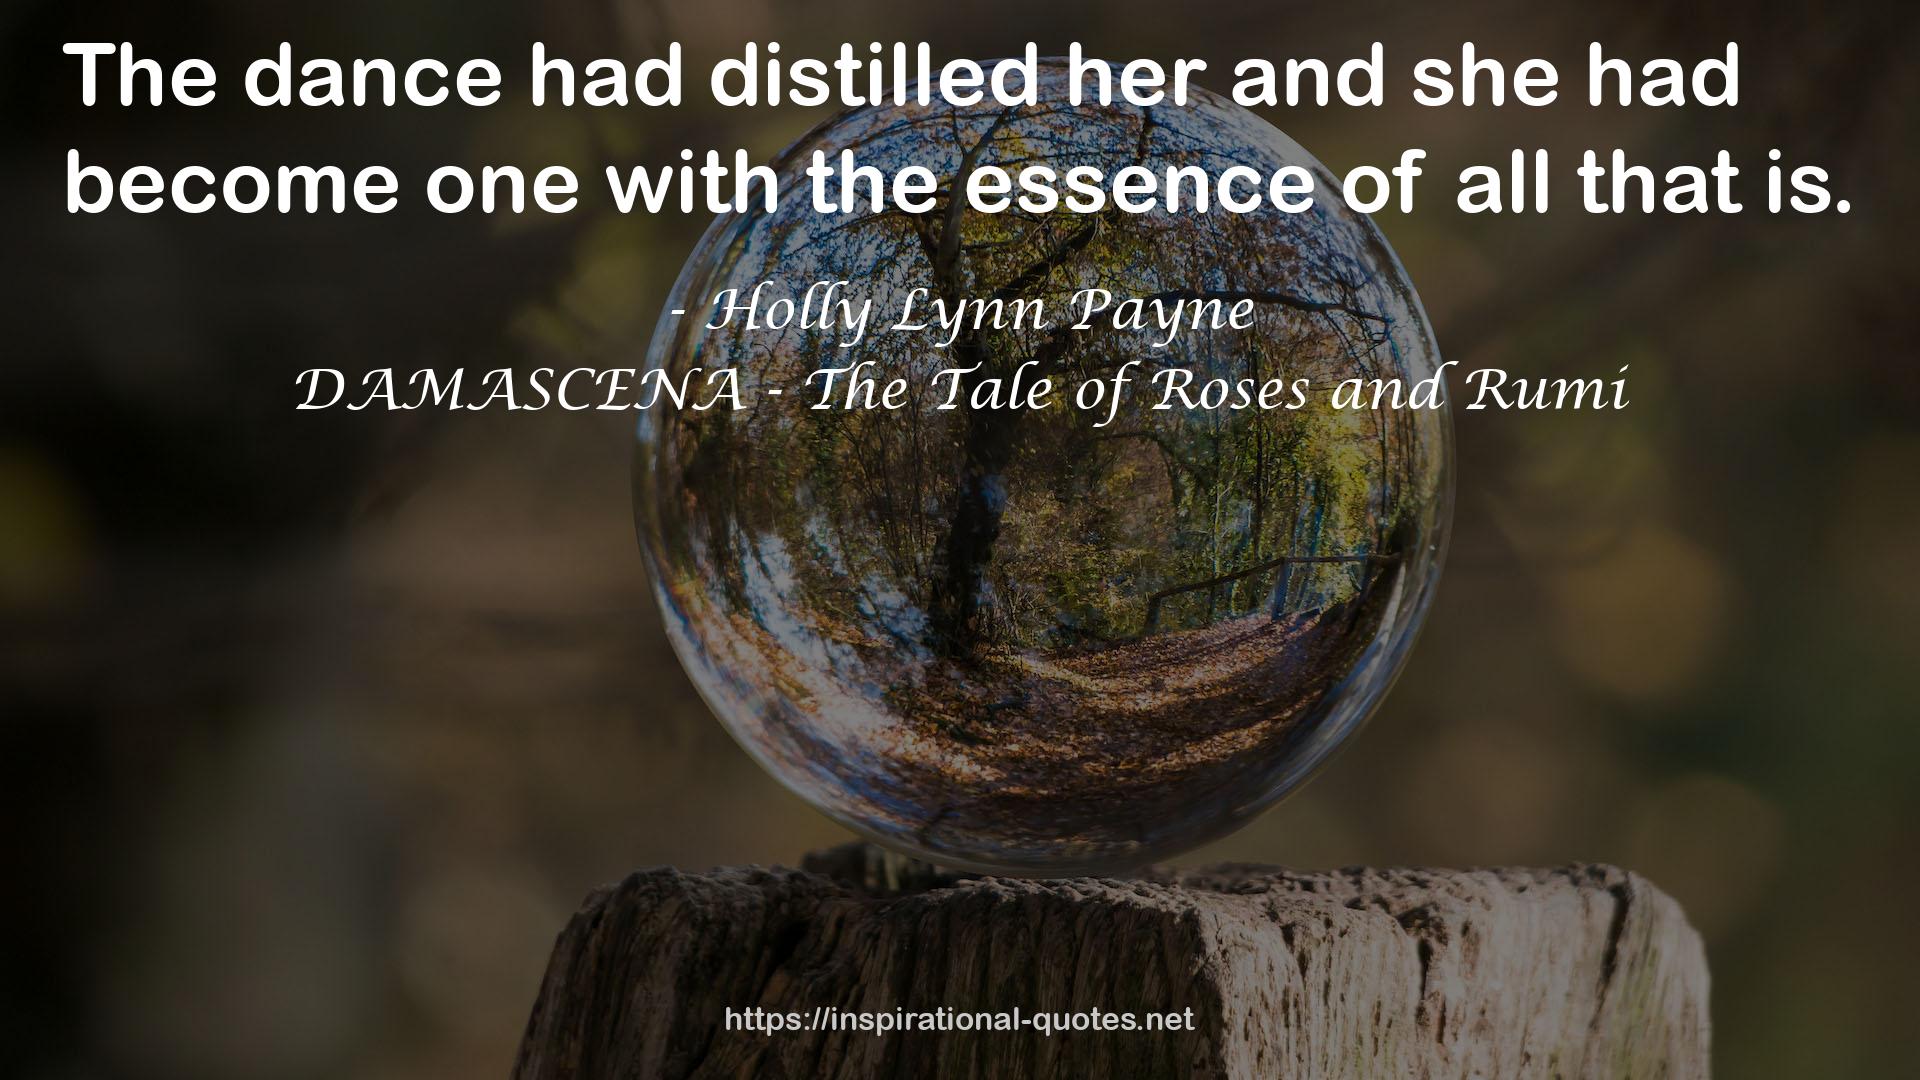 DAMASCENA - The Tale of Roses and Rumi QUOTES